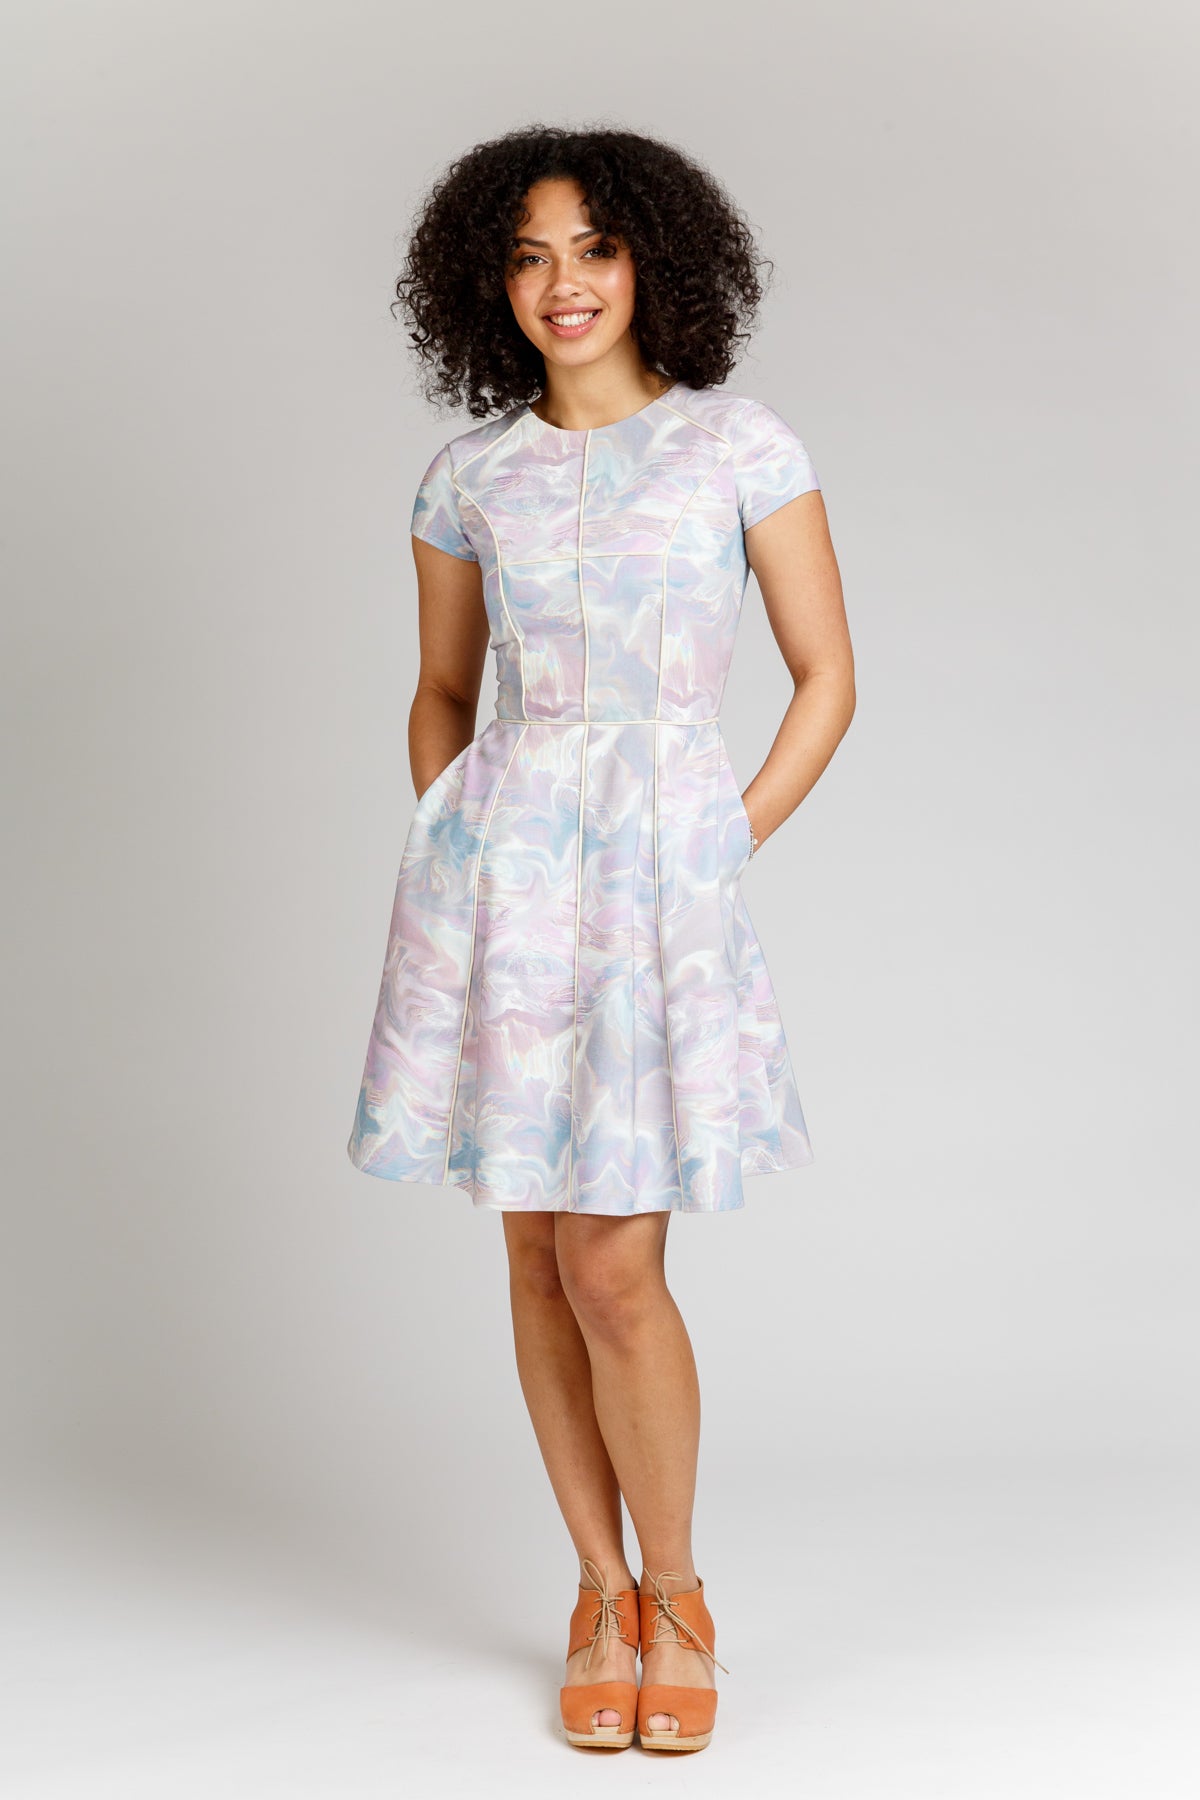 The Little Sewist: Round neck short sleeve fit and flare dress pattern